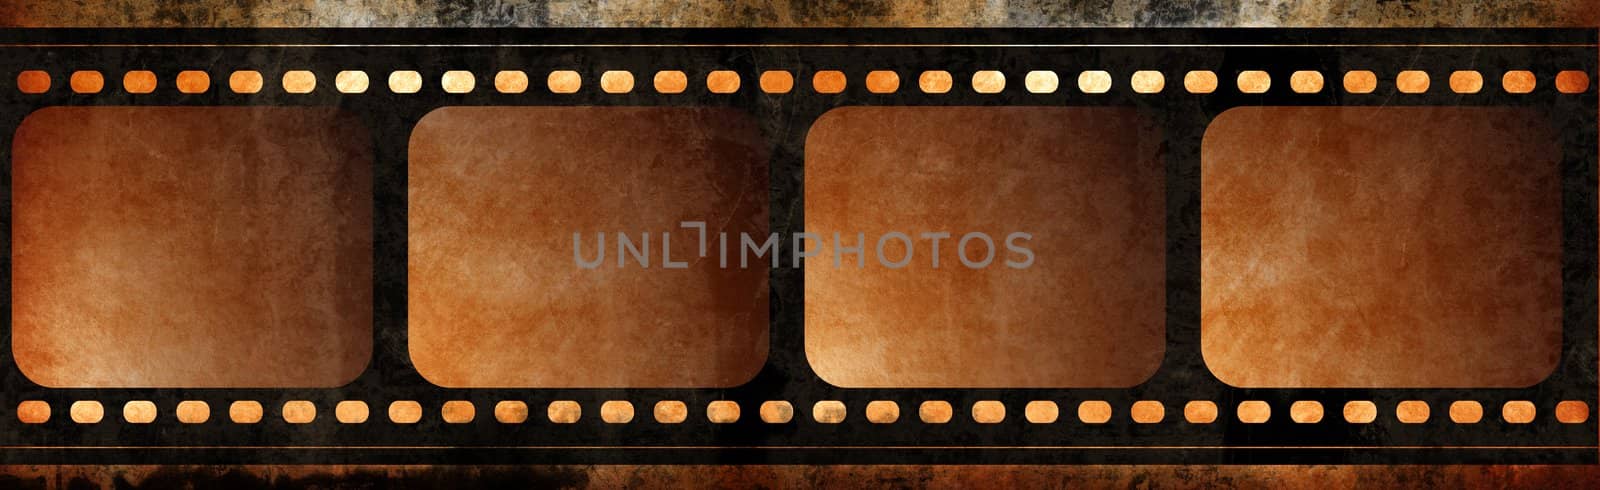 Computer designed highly detailed film frame with space for your text or image.Nice grunge element for your projects